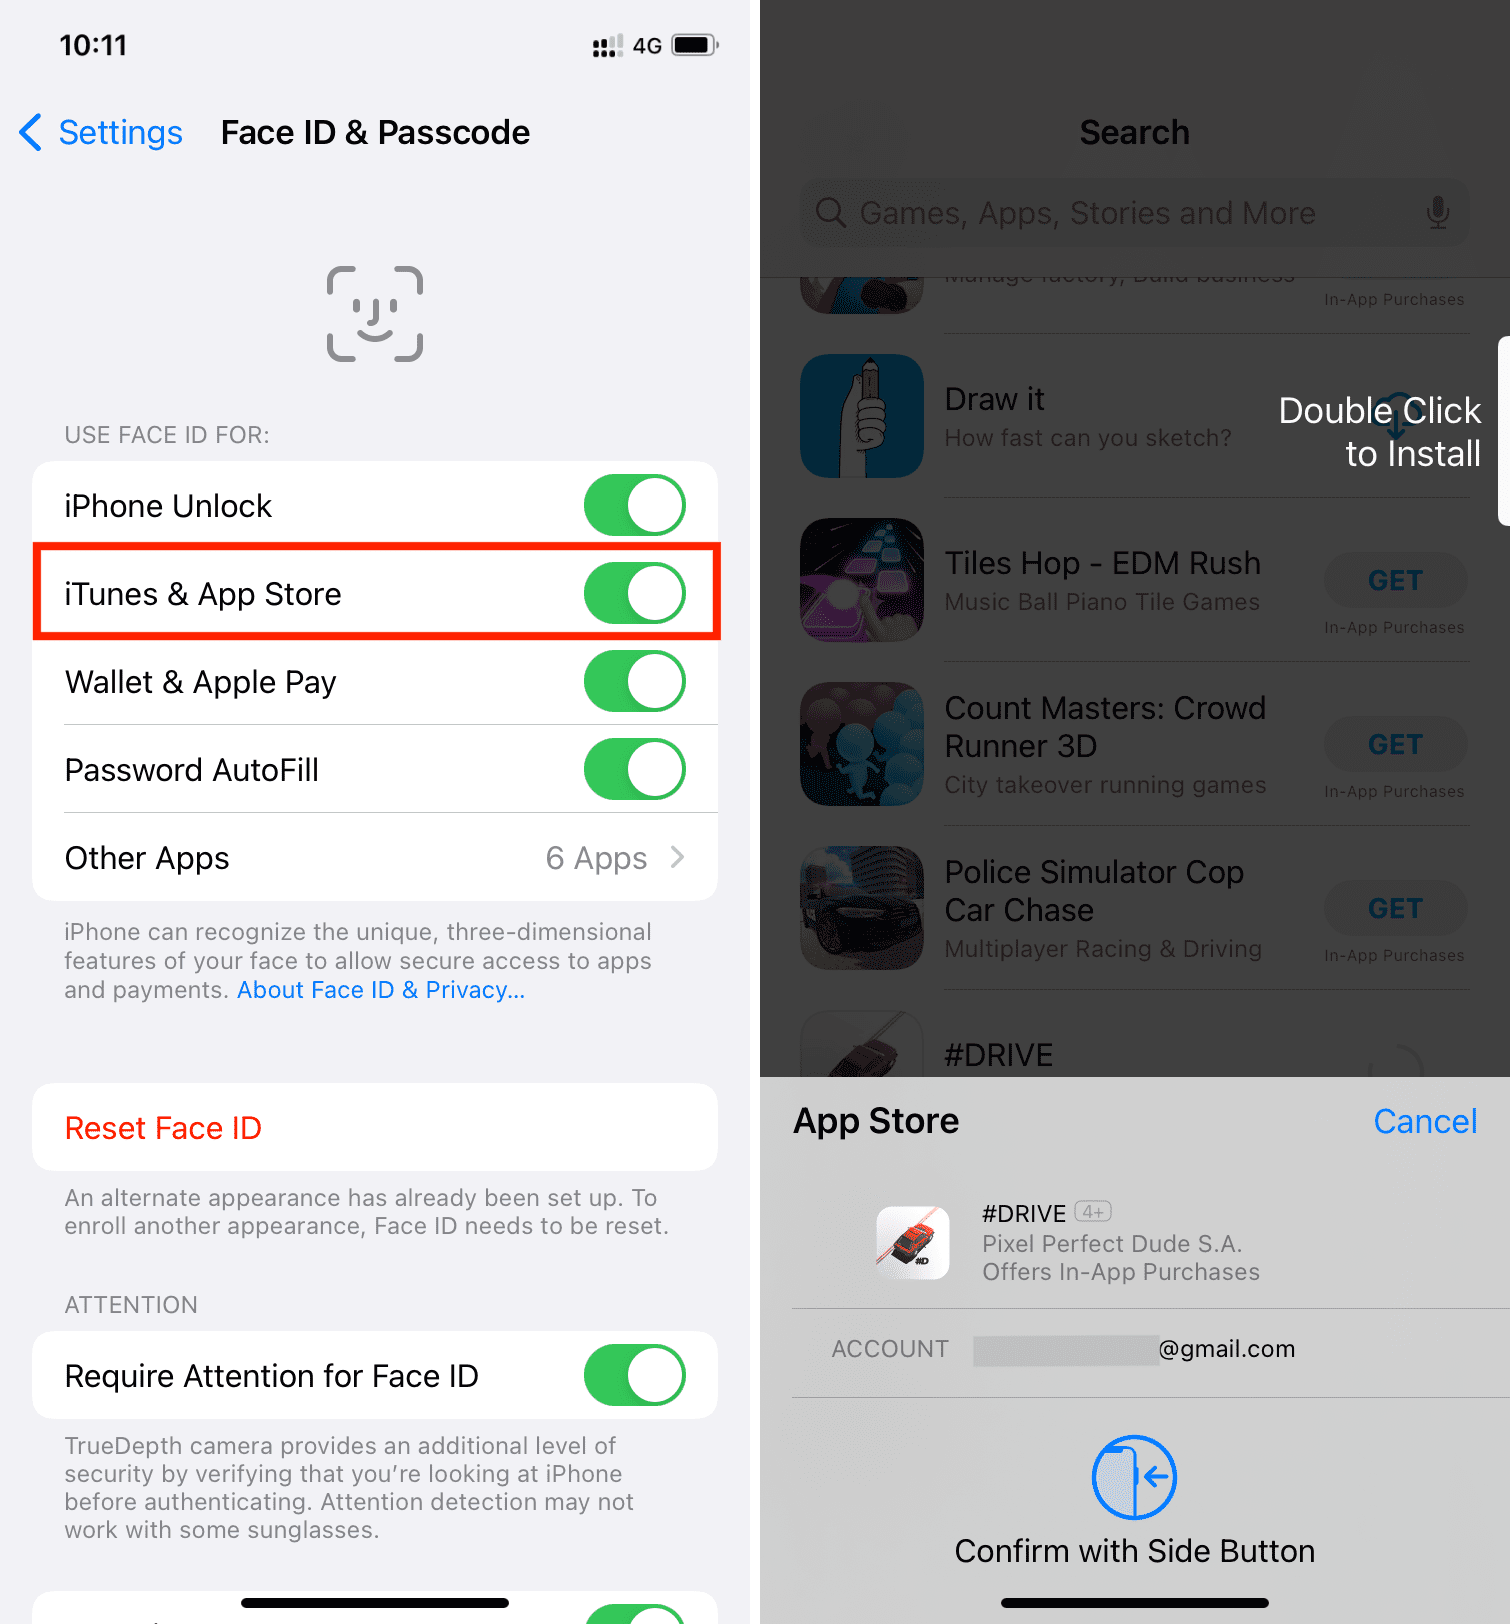 Double Click to Install alert in iPhone App Store